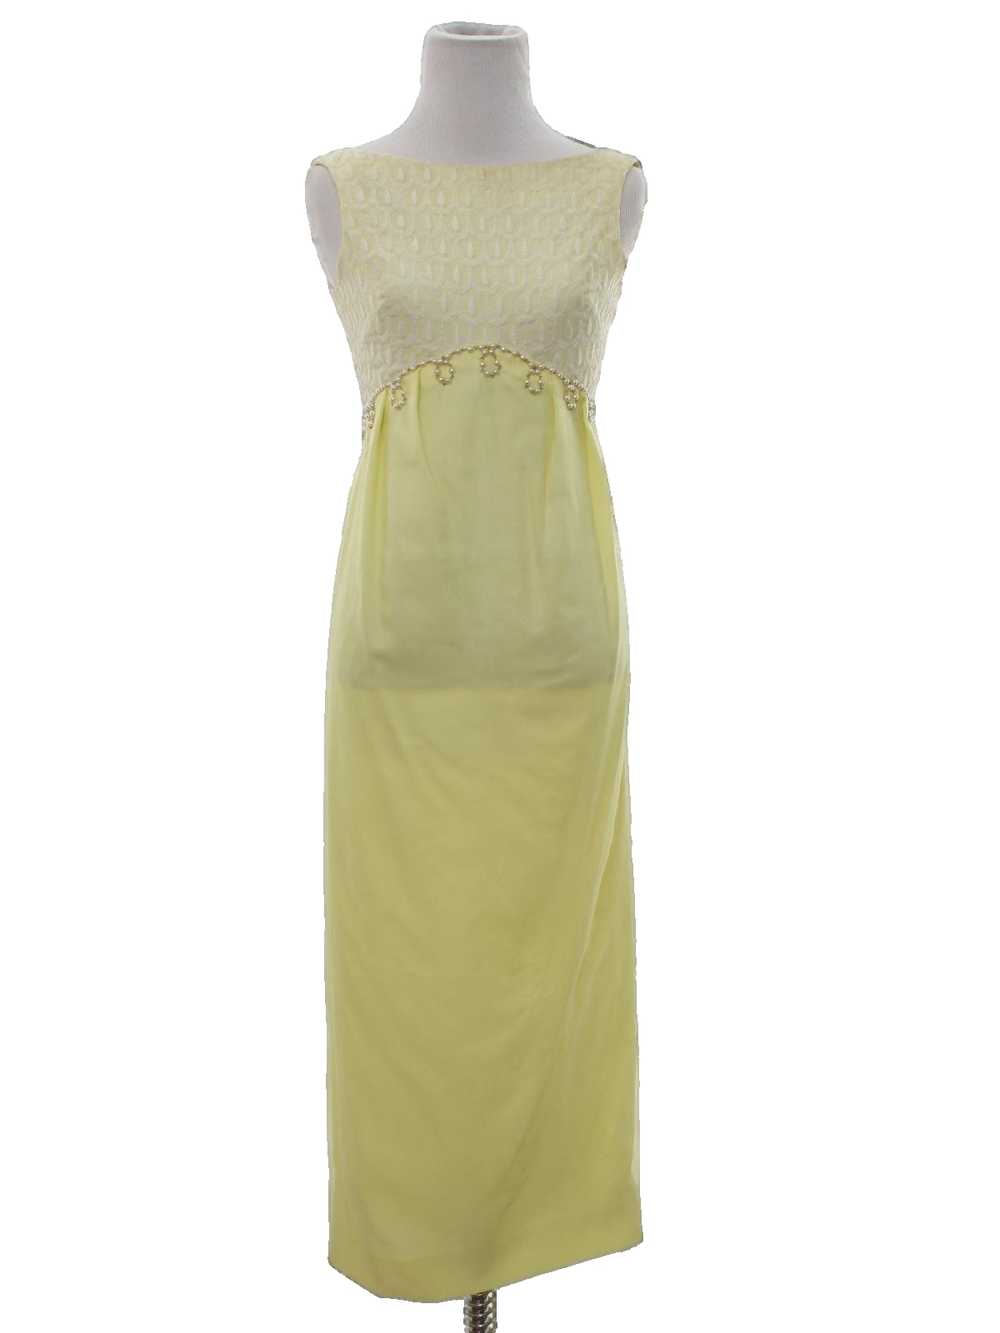 1960's or Girl Cocktail Maxi Dress - image 1